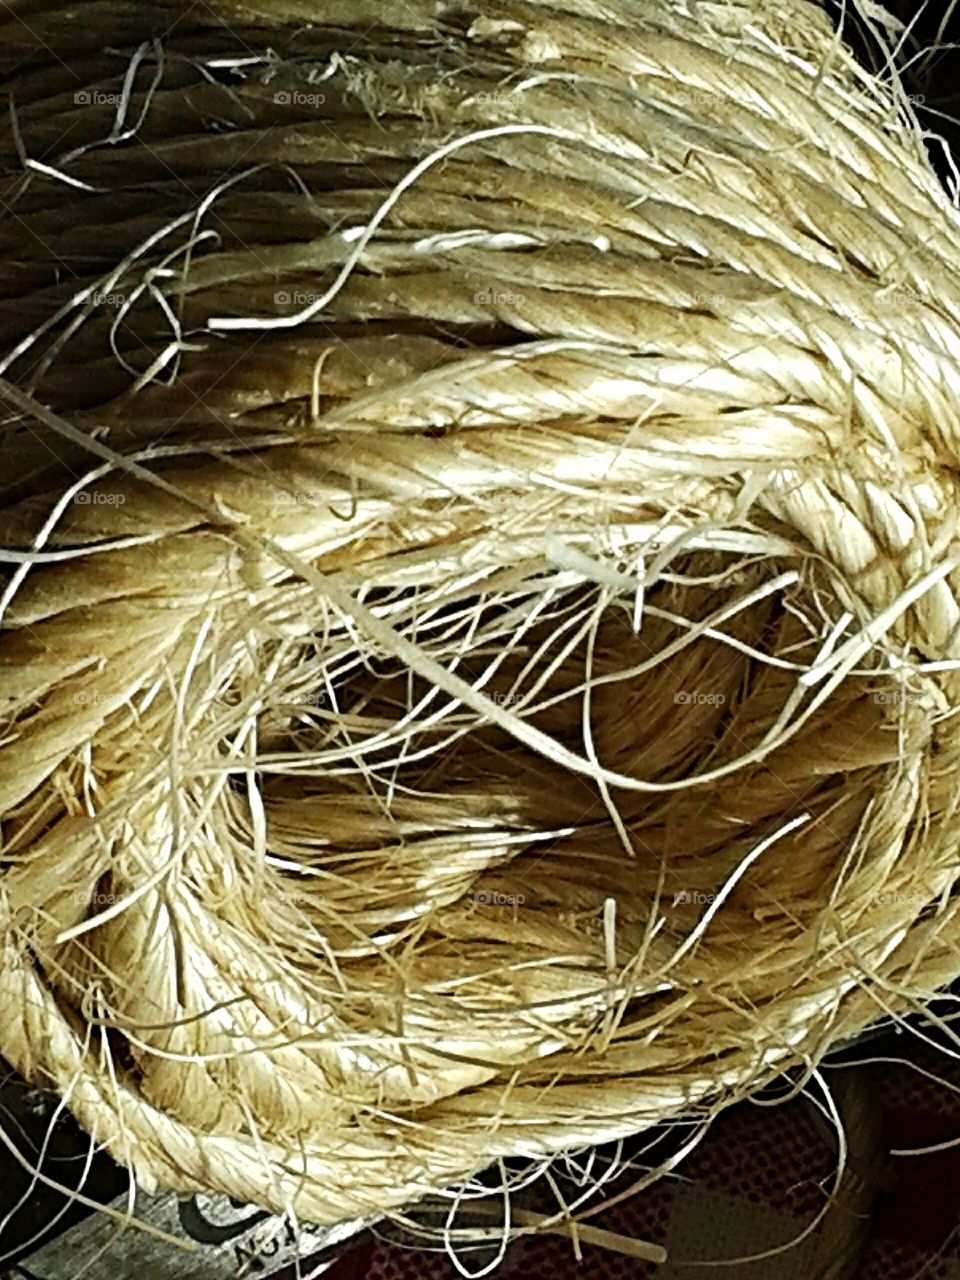 Garden twine.  The texture and color of the twine relax my mind.